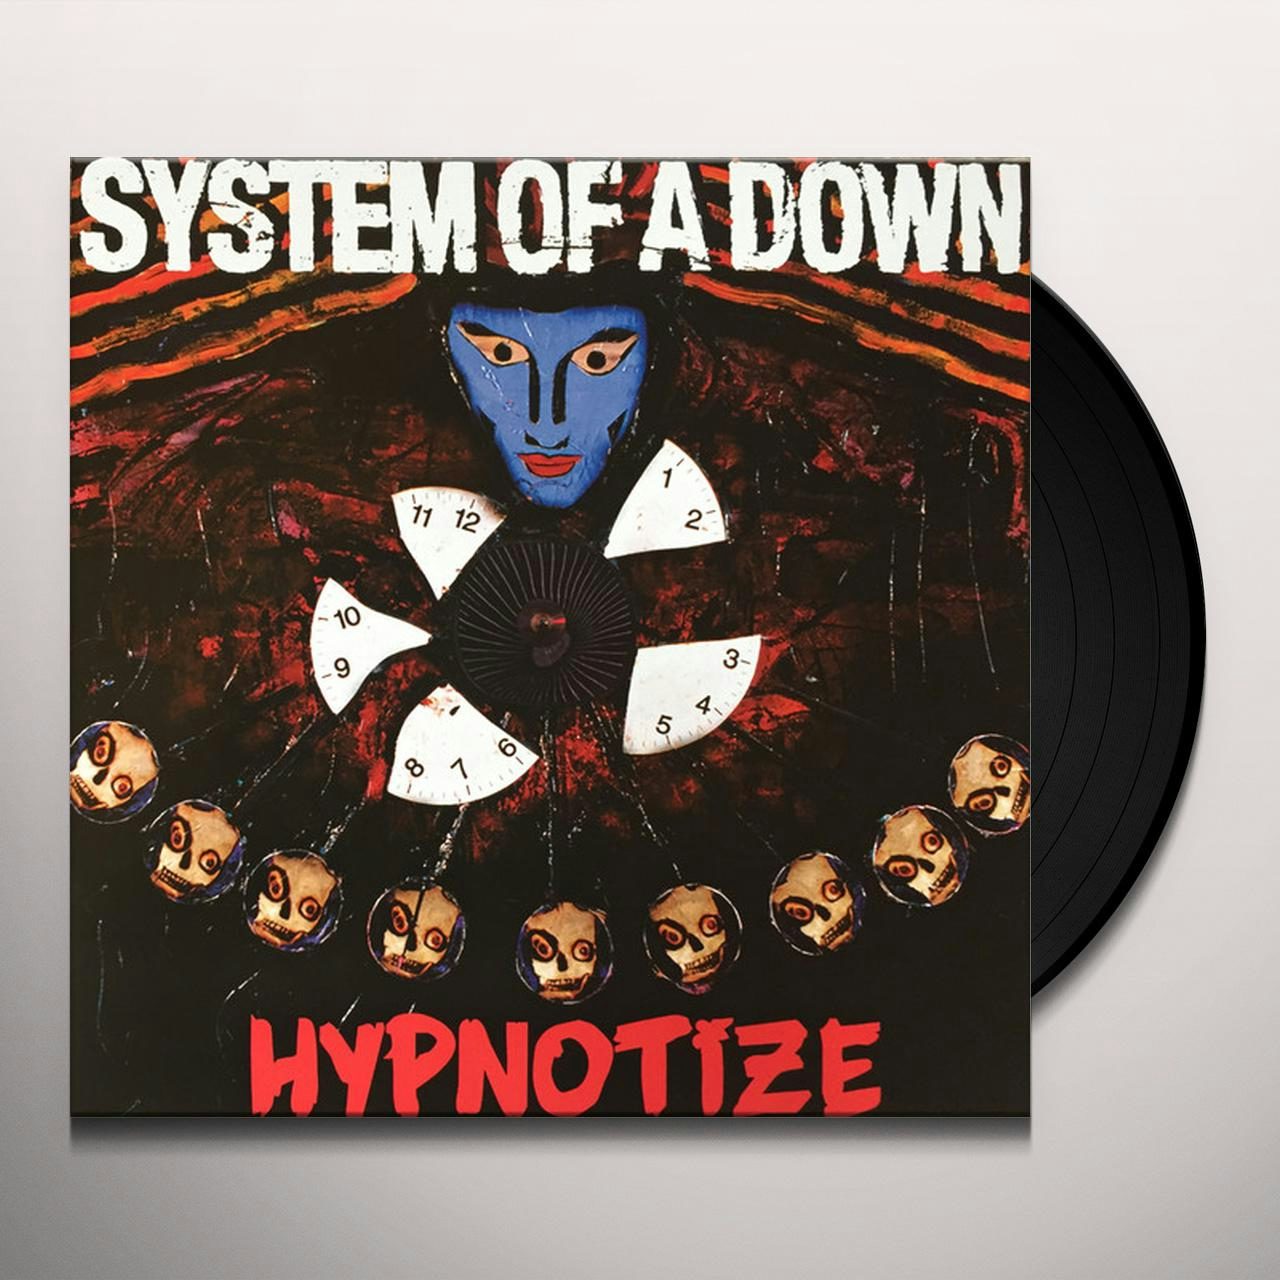 hypnotize system of a down meaning